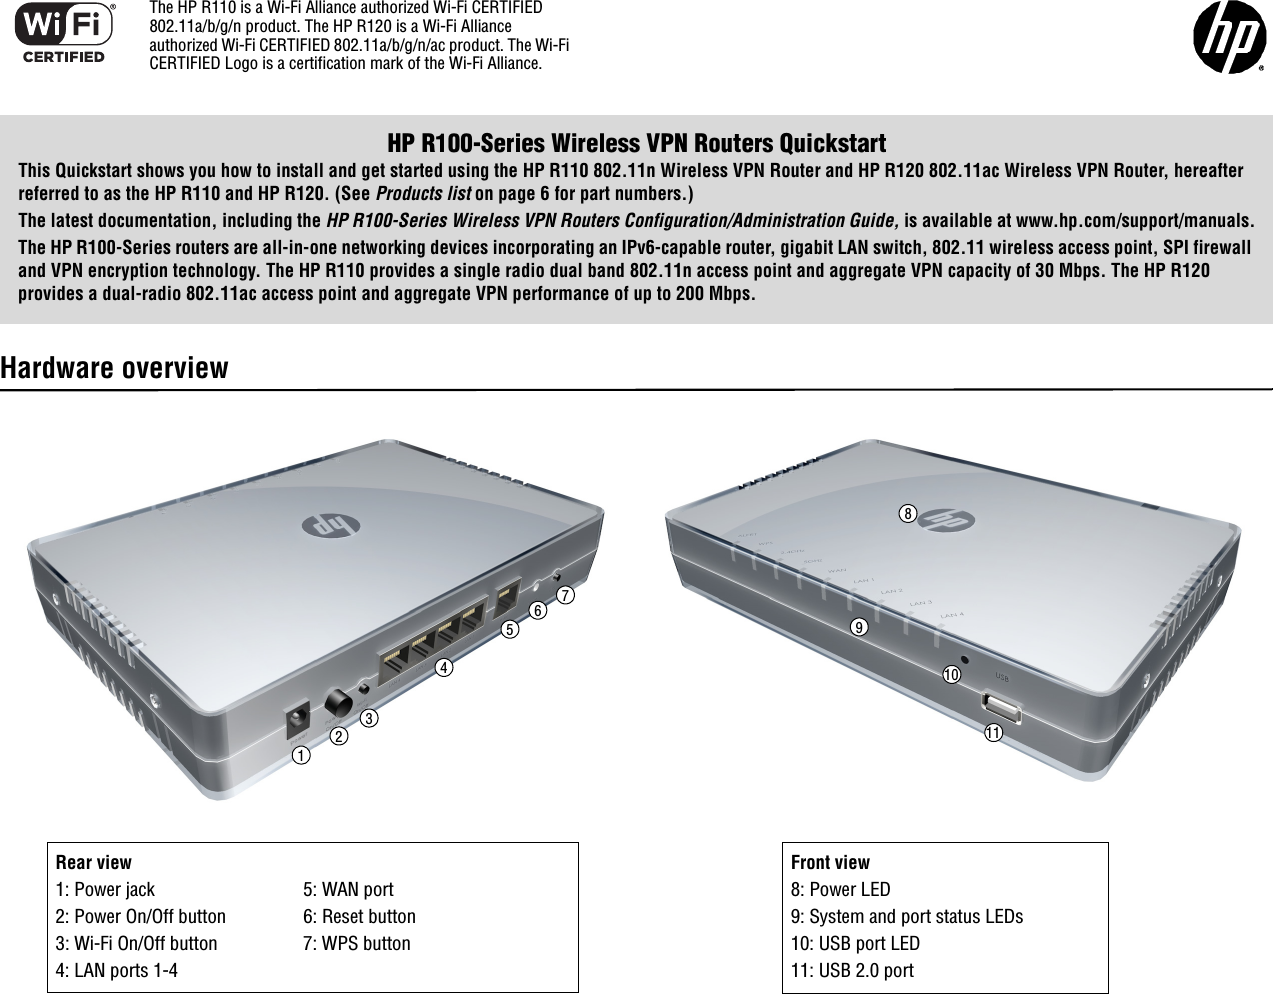 HP R100-Series Wireless VPN Routers QuickstartThis Quickstart shows you how to install and get started using the HP R110 802.11n Wireless VPN Router and HP R120 802.11ac Wireless VPN Router, hereafter referred to as the HP R110 and HP R120. (See Products list on page 6 for part numbers.)The latest documentation, including the HP R100-Series Wireless VPN Routers Configuration/Administration Guide, is available at www.hp.com/support/manuals.The HP R100-Series routers are all-in-one networking devices incorporating an IPv6-capable router, gigabit LAN switch, 802.11 wireless access point, SPI firewall and VPN encryption technology. The HP R110 provides a single radio dual band 802.11n access point and aggregate VPN capacity of 30 Mbps. The HP R120 provides a dual-radio 802.11ac access point and aggregate VPN performance of up to 200 Mbps.Hardware overview8124567910311Rear view1: Power jack 5: WAN port2: Power On/Off button 6: Reset button3: Wi-Fi On/Off button 7: WPS button4: LAN ports 1-4Front view8: Power LED9: System and port status LEDs10: USB port LED11: USB 2.0 portThe HP R110 is a Wi-Fi Alliance authorized Wi-Fi CERTIFIED 802.11a/b/g/n product. The HP R120 is a Wi-Fi Alliance authorized Wi-Fi CERTIFIED 802.11a/b/g/n/ac product. The Wi-Fi CERTIFIED Logo is a certification mark of the Wi-Fi Alliance.